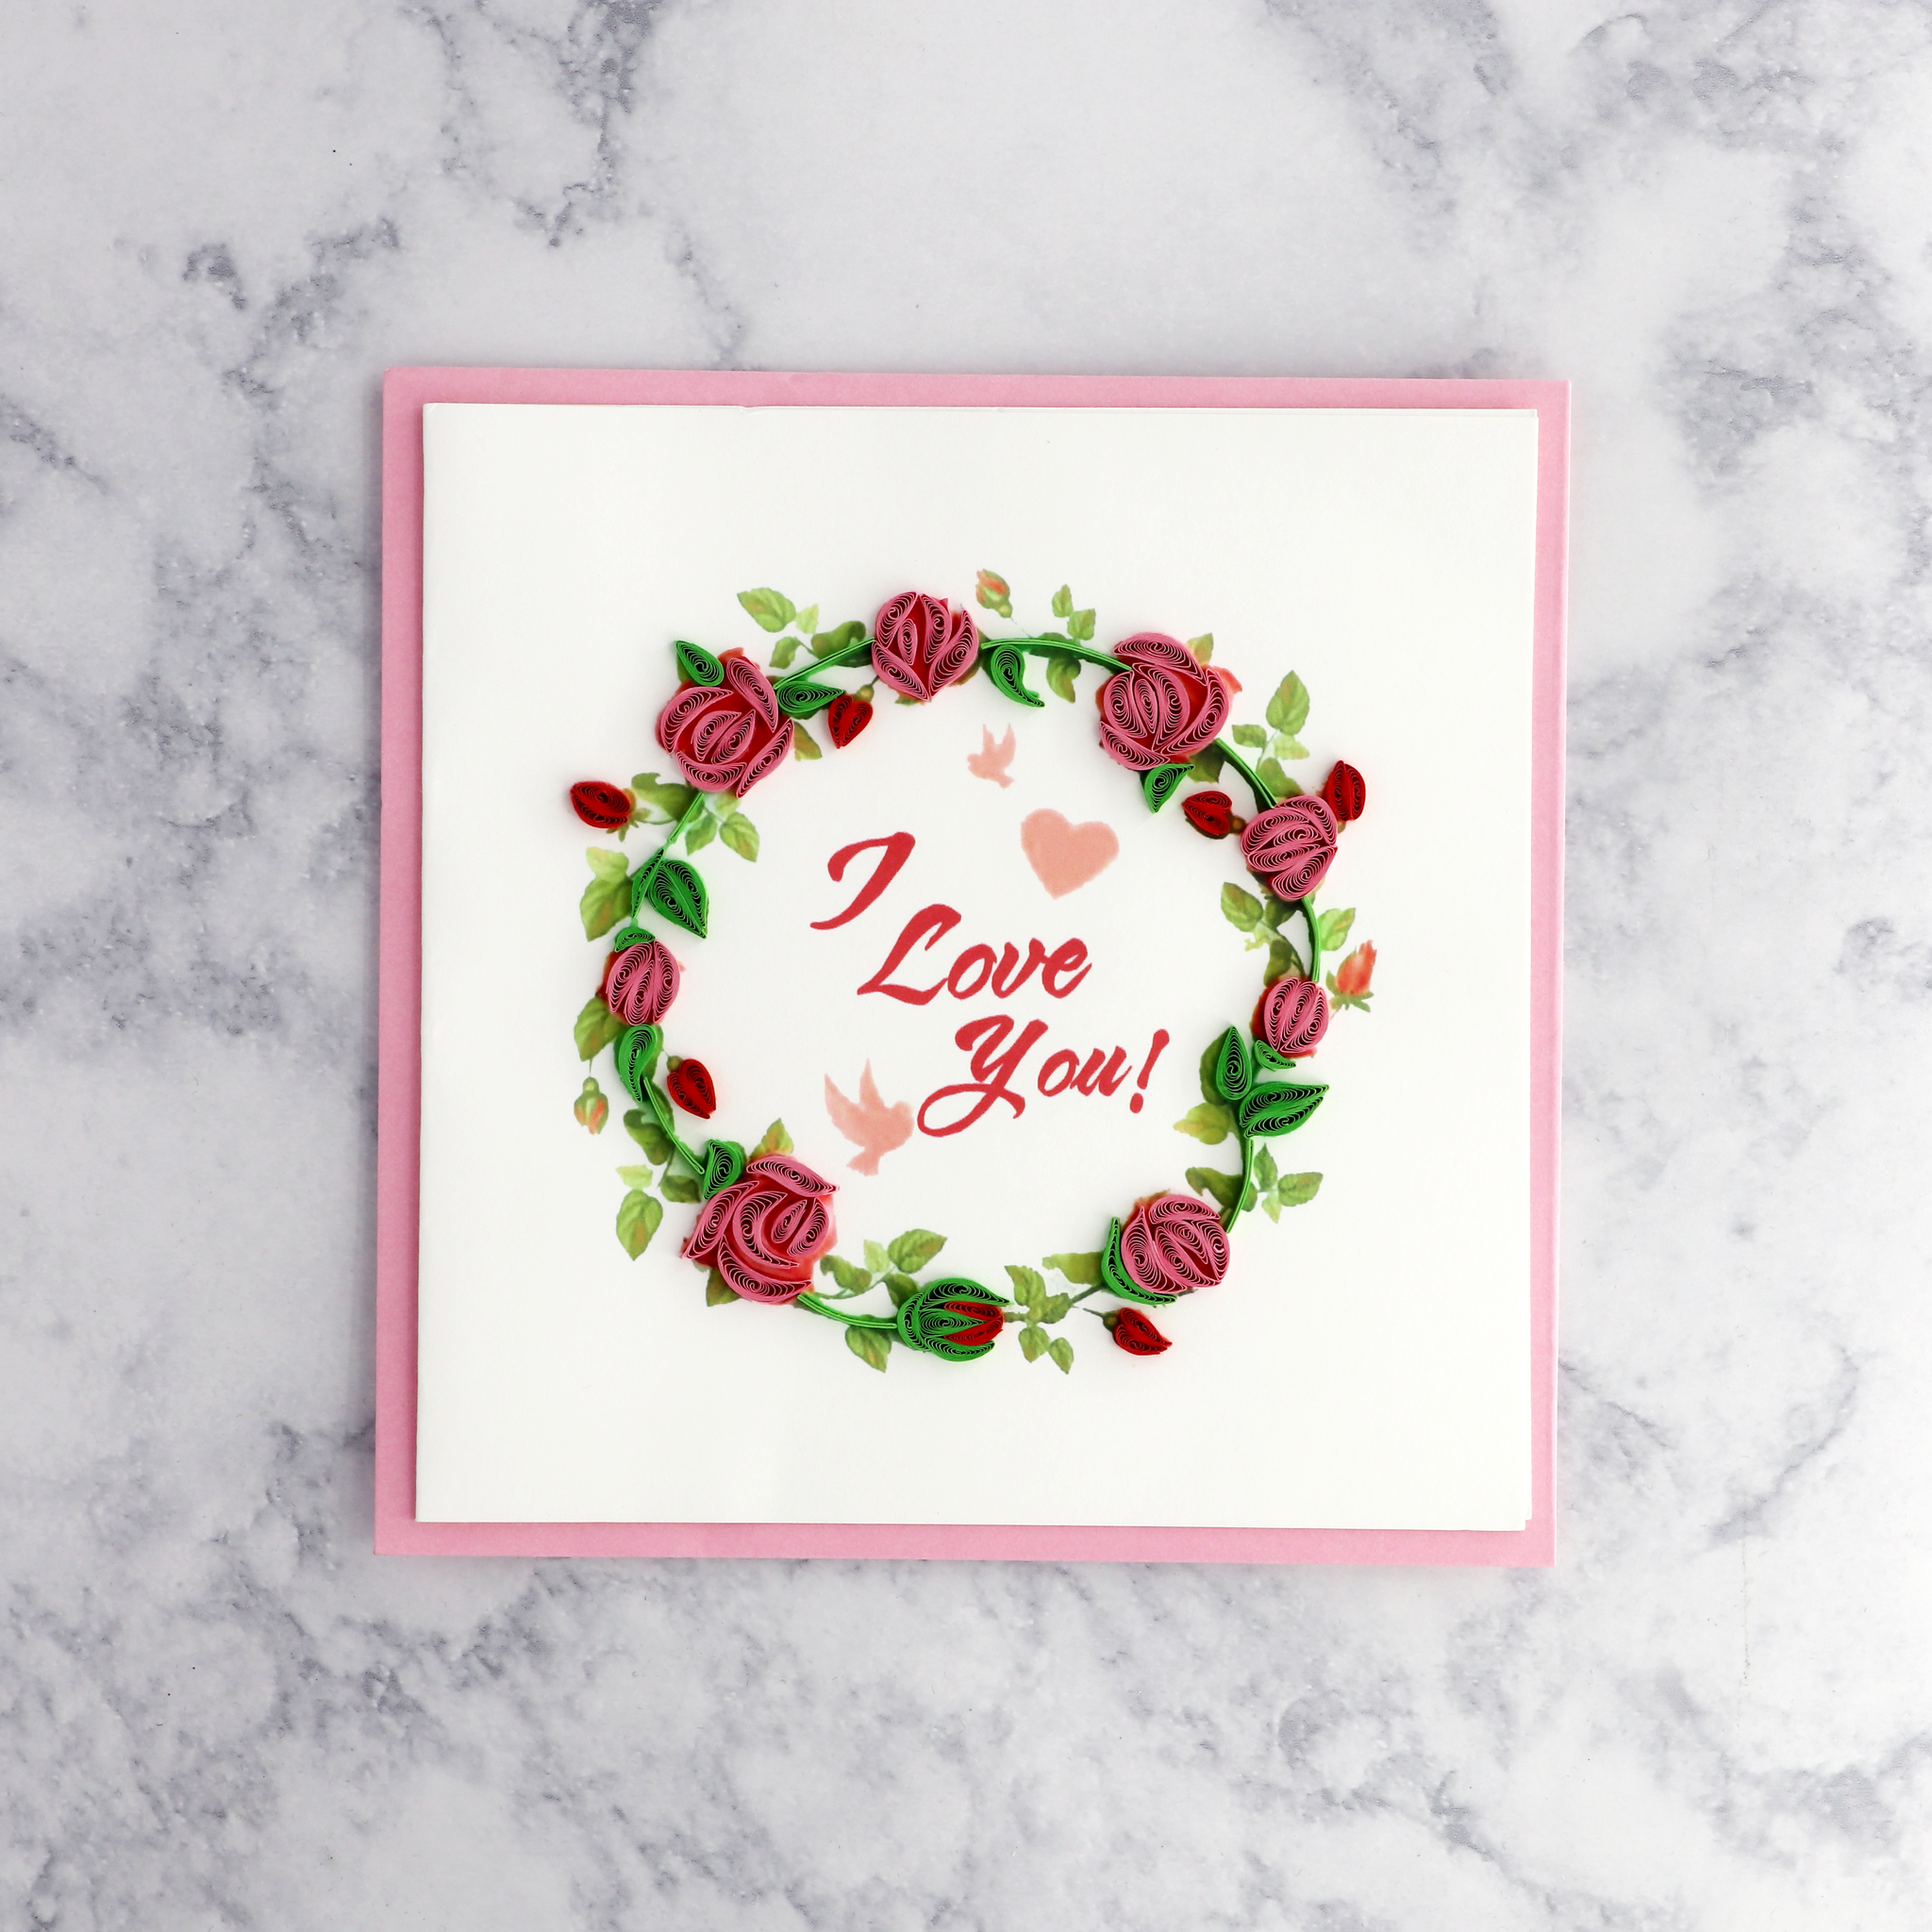 Floral Wreath “I Love You” Quilling Romance Card